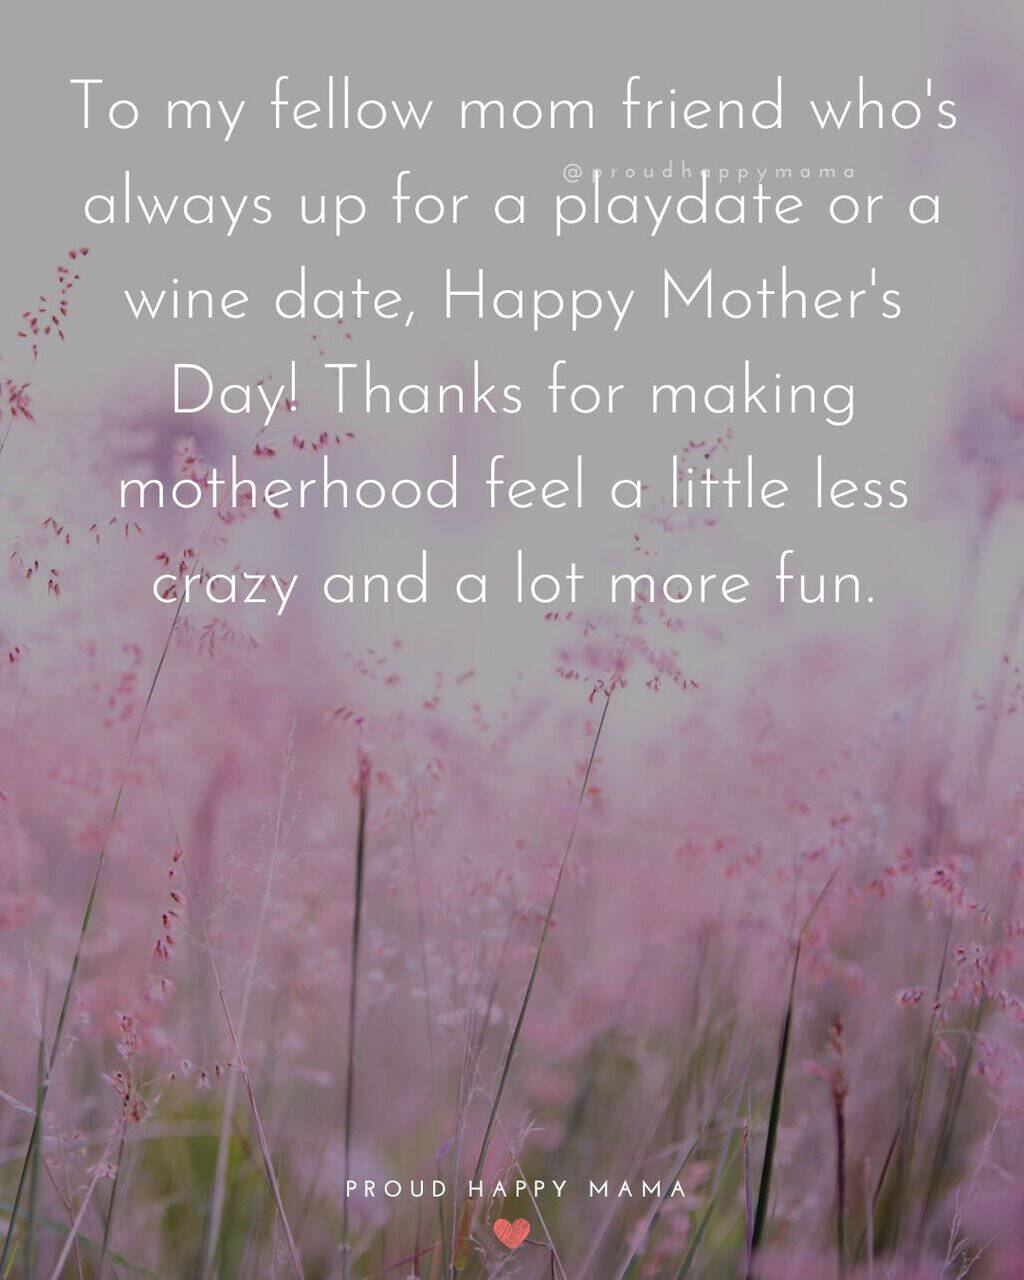 Funny Mother's Day Quotes For Friends